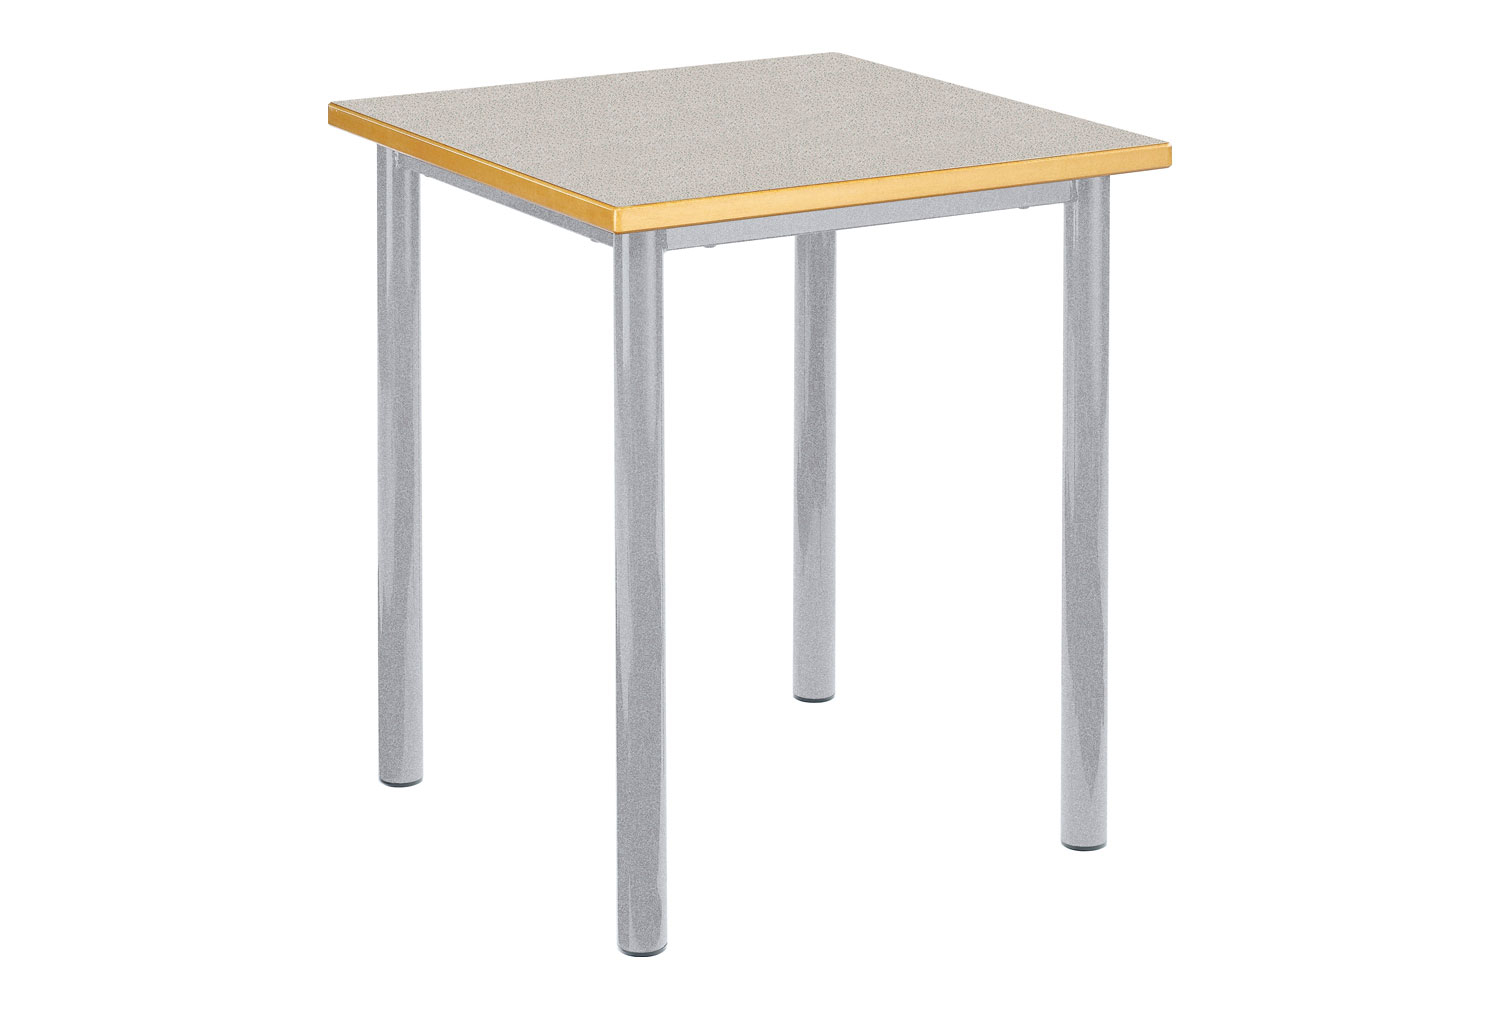 Qty 4 - RT45 Square Classroom Tables 14+ Years, Silver Frame, Beech Top, MDF Beech Edge